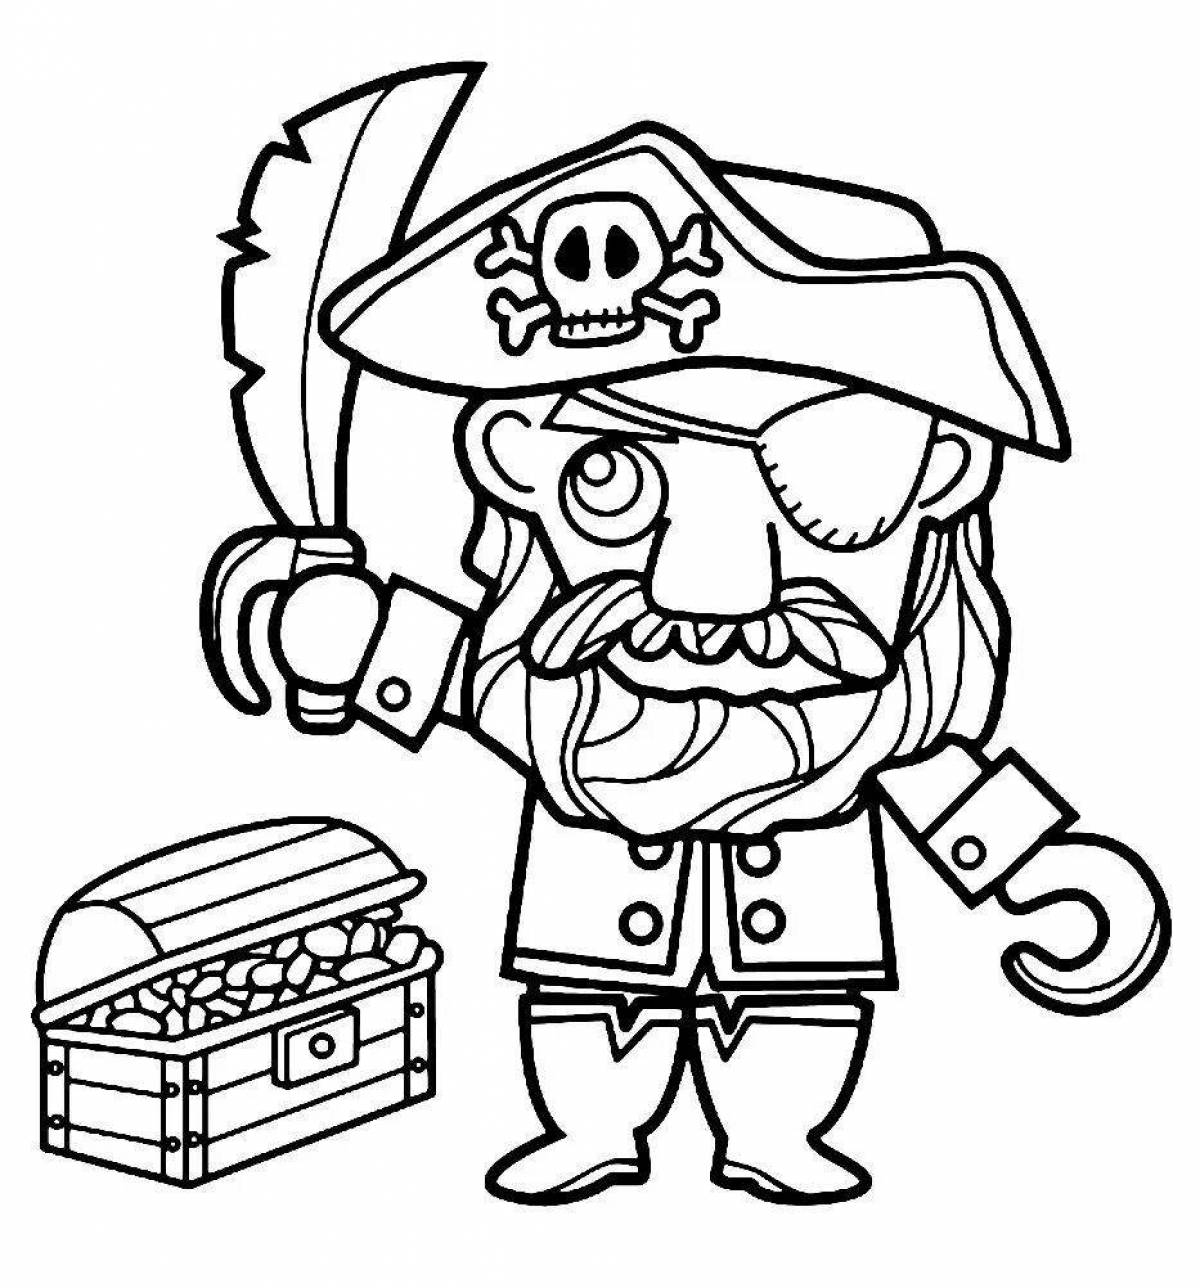 Funny pirate coloring book